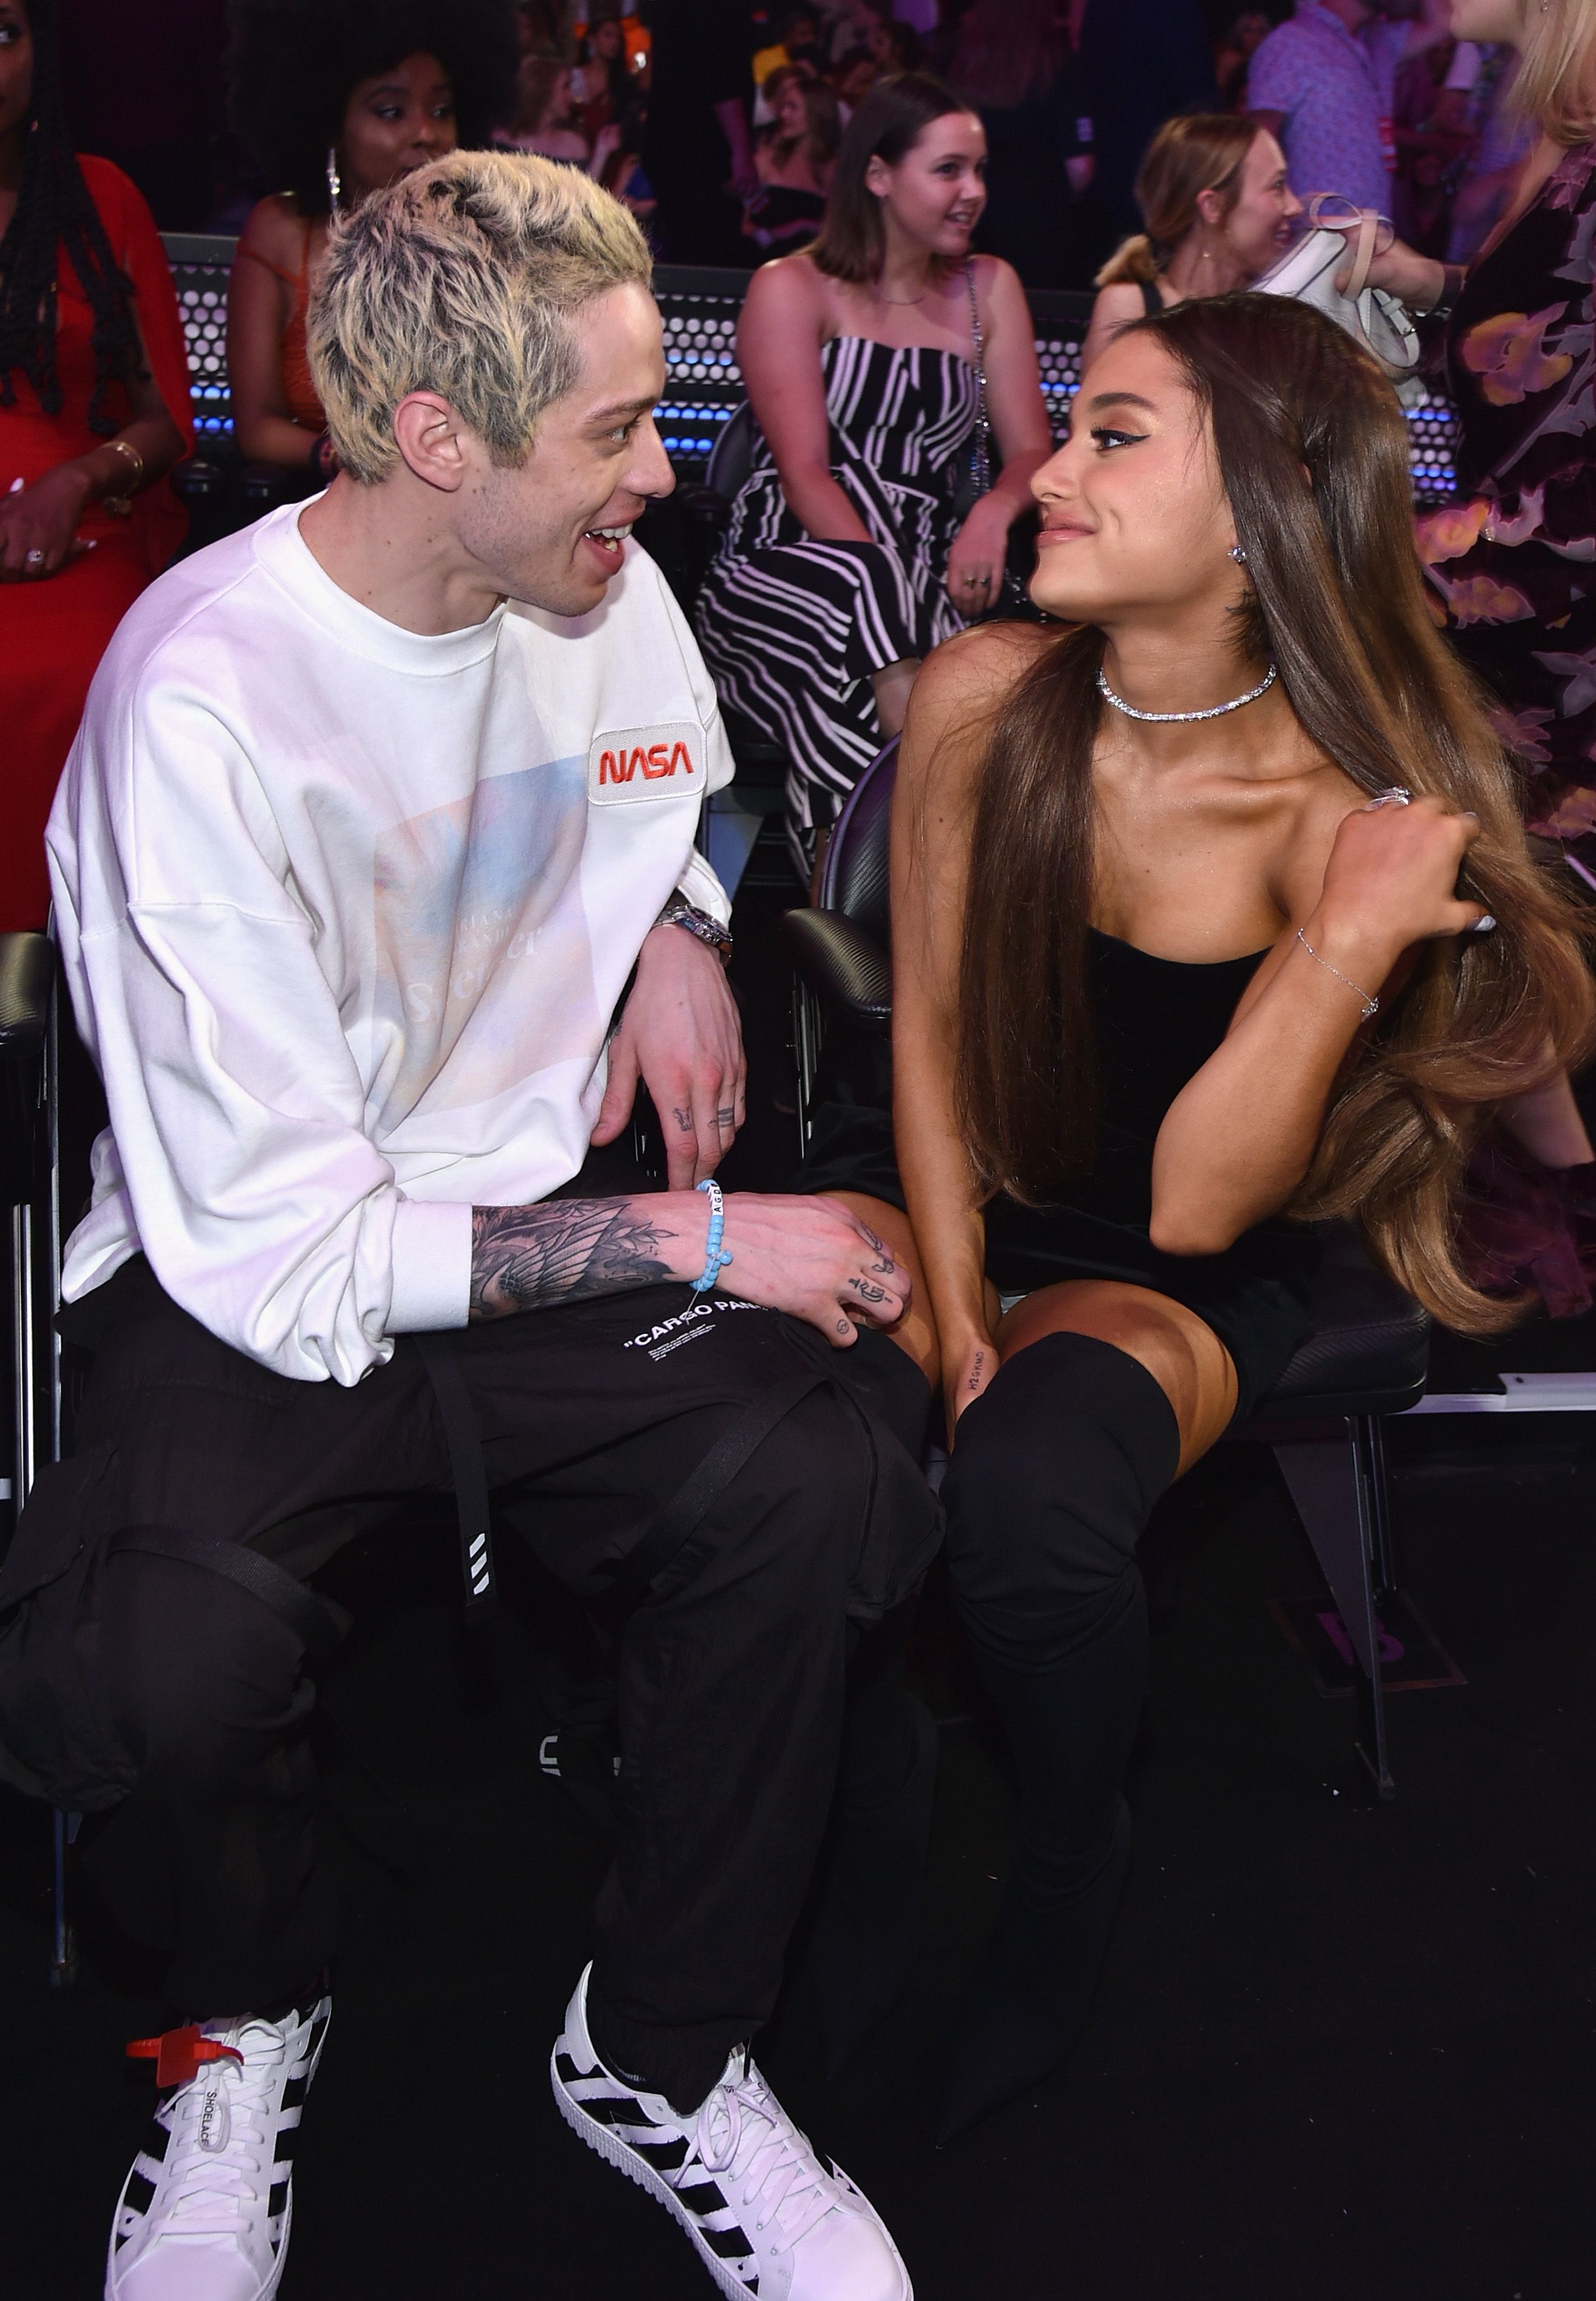 Report: Ariana Grande And Pete Davidson Have Ended Their Relationship, News